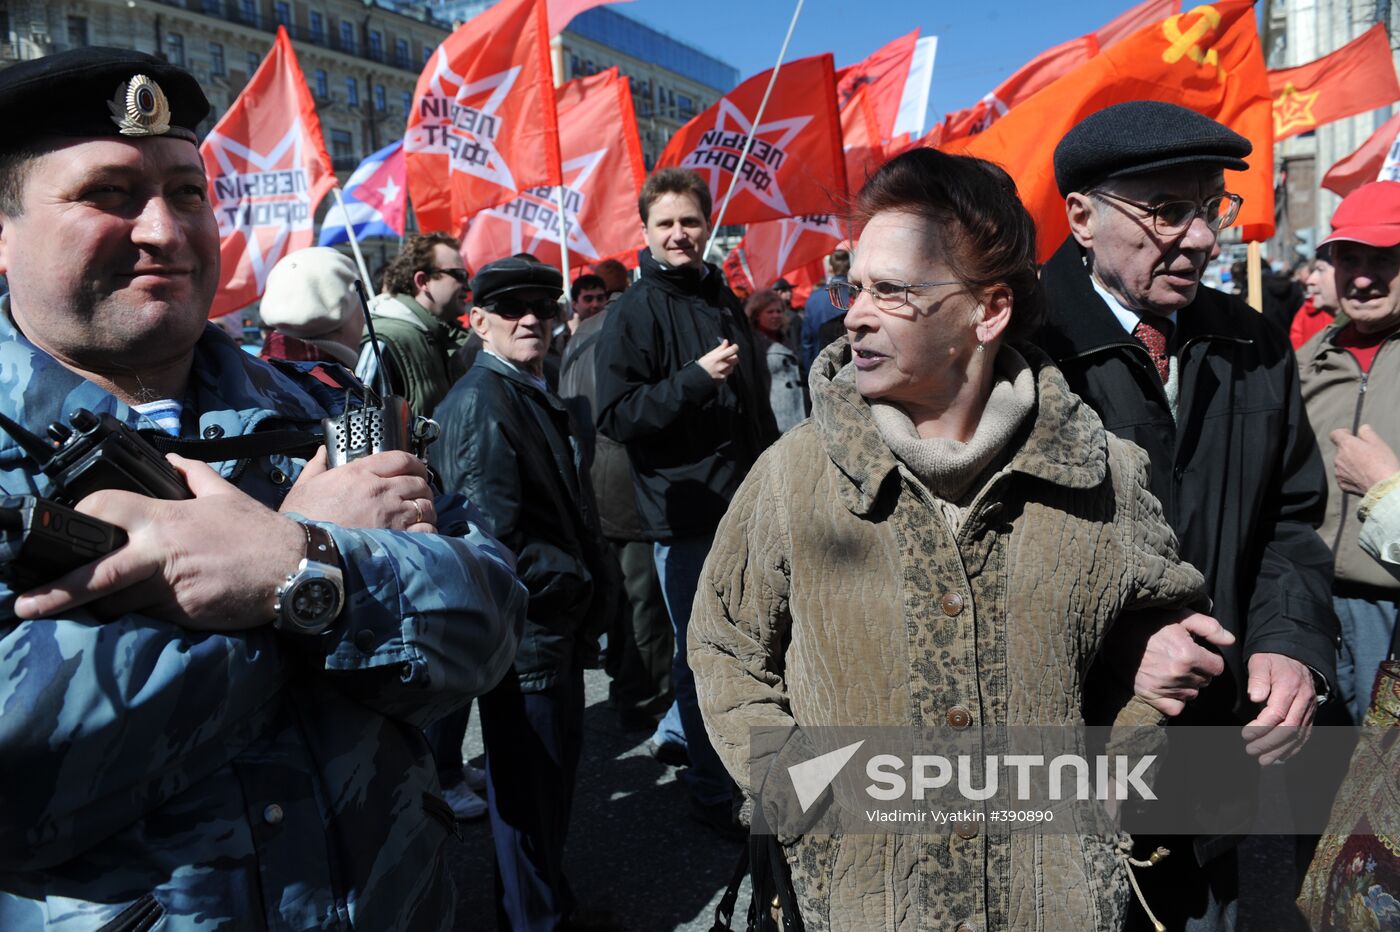 Communist Party supporters hold Spring and Labor Day march